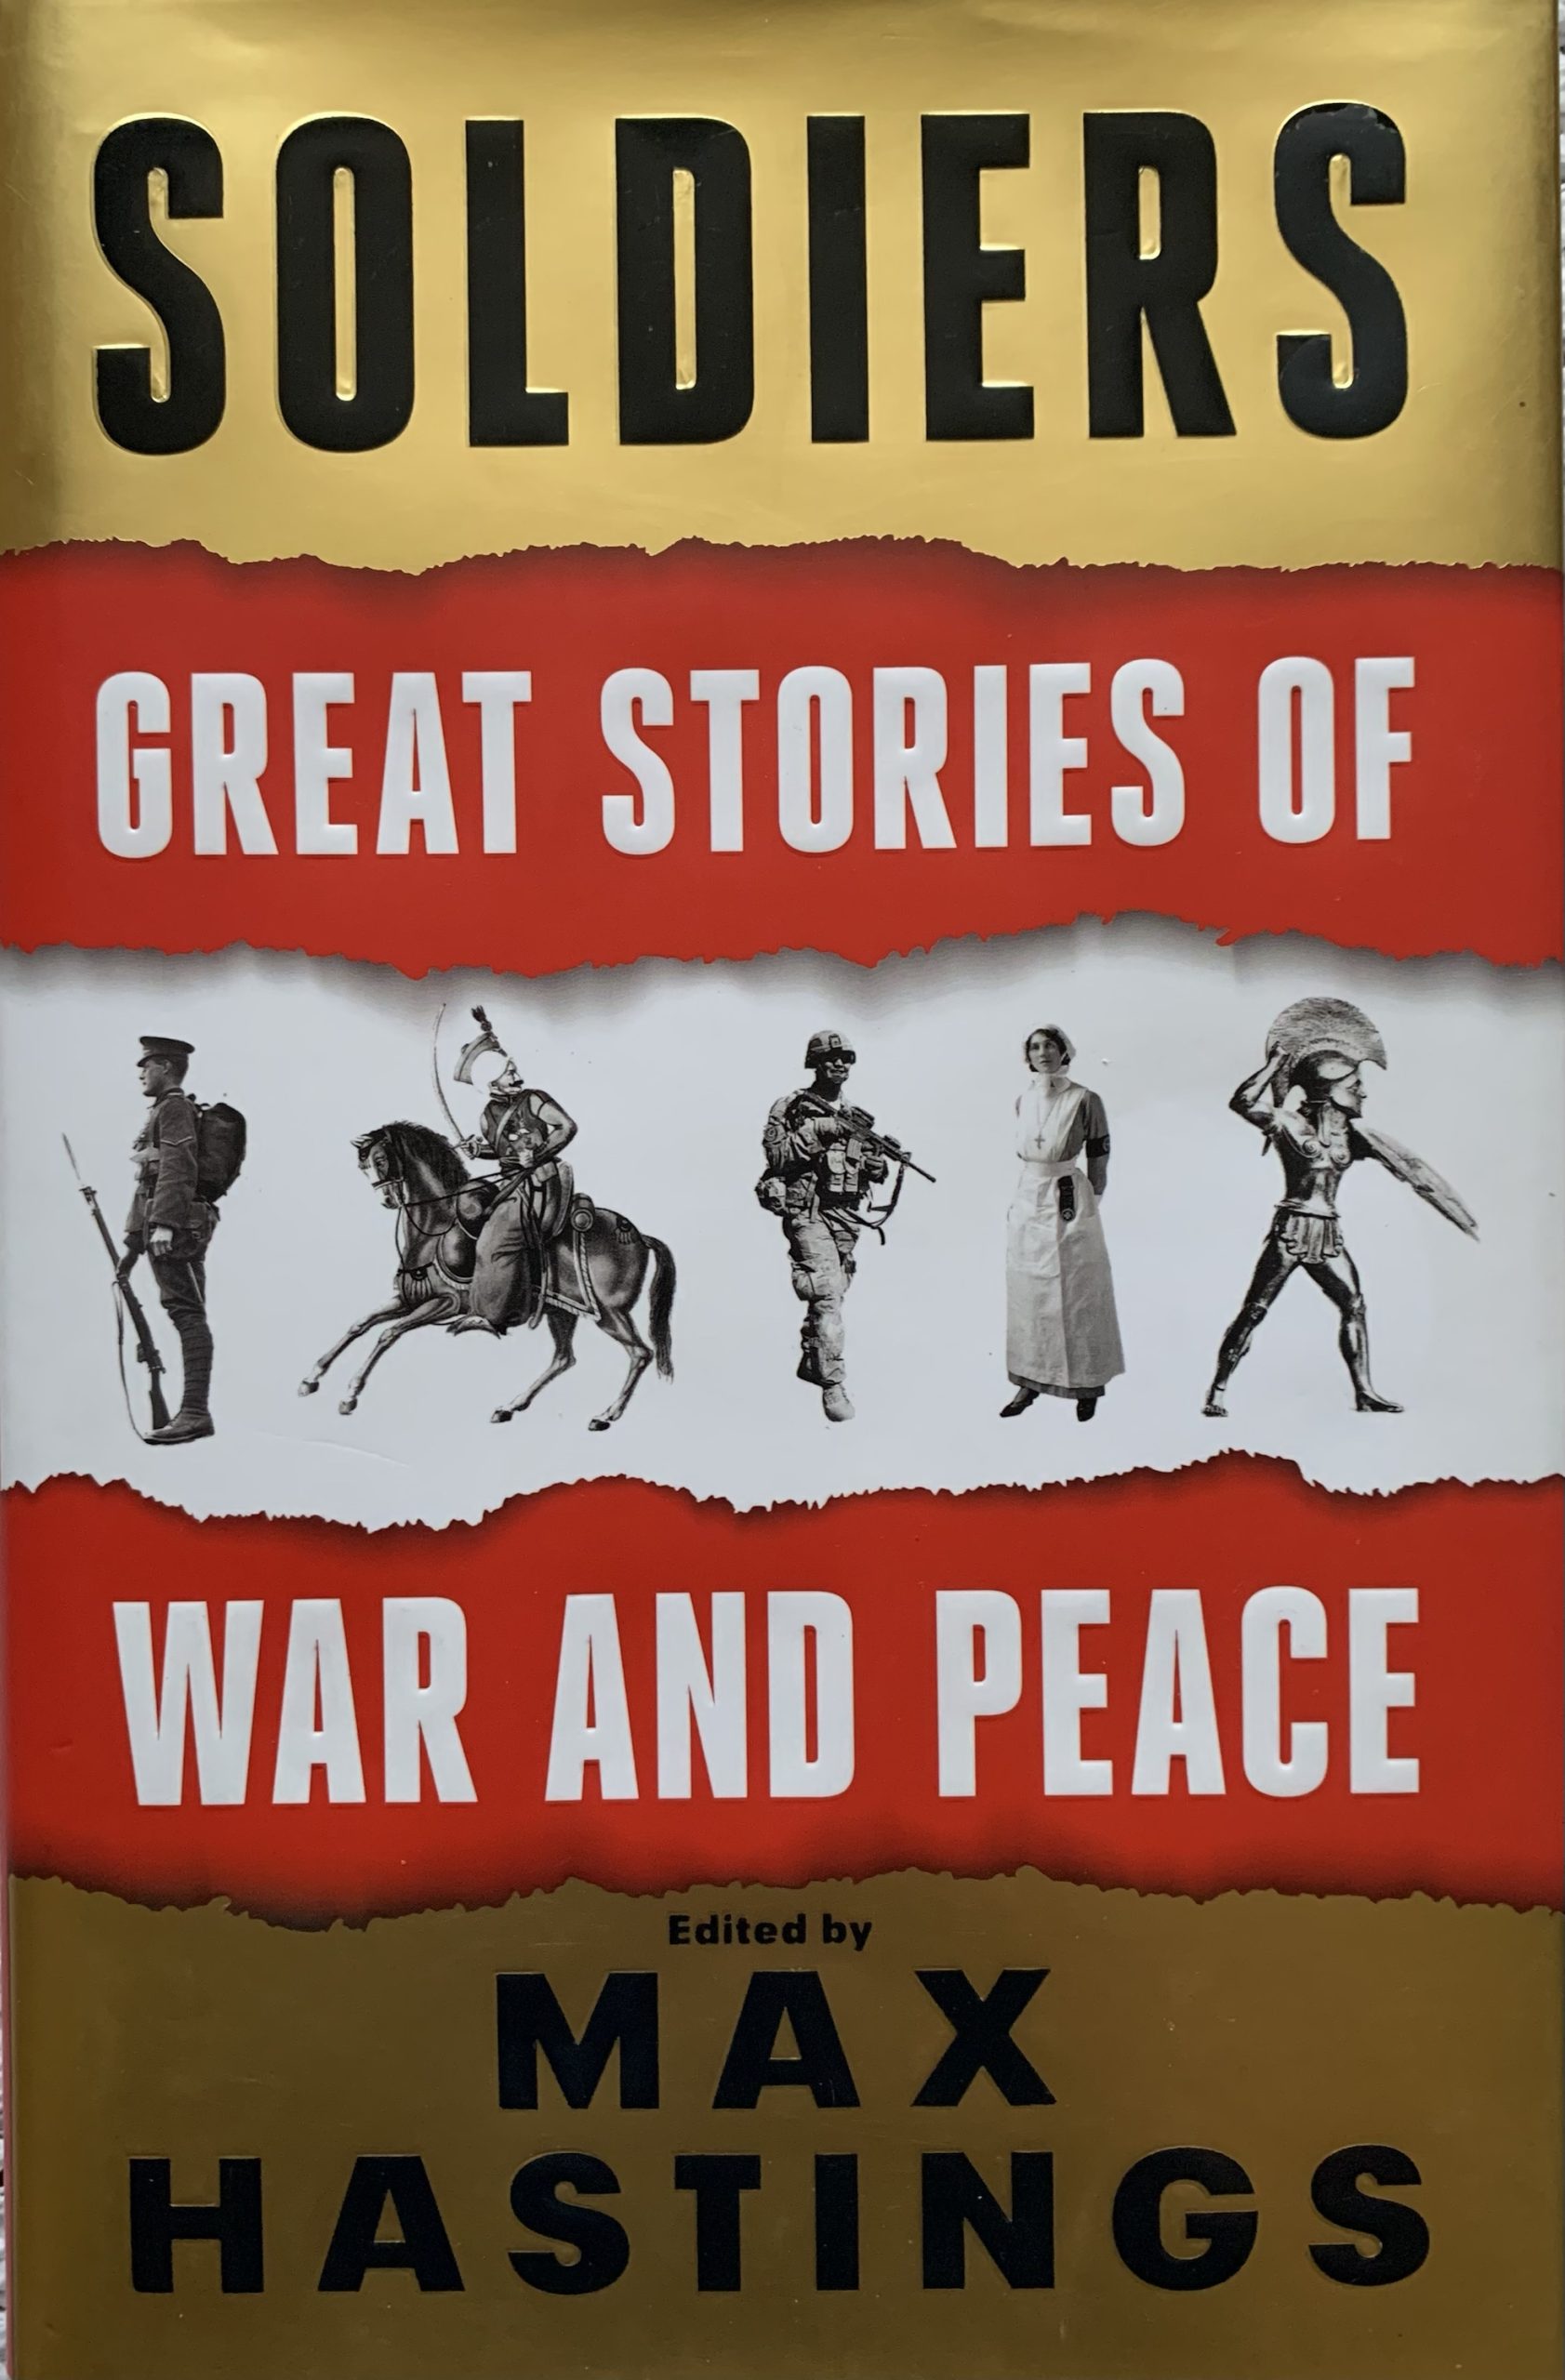 Soldiers: Great Stories of War and Peace by Max Hastings - Signed Bookplate Edition